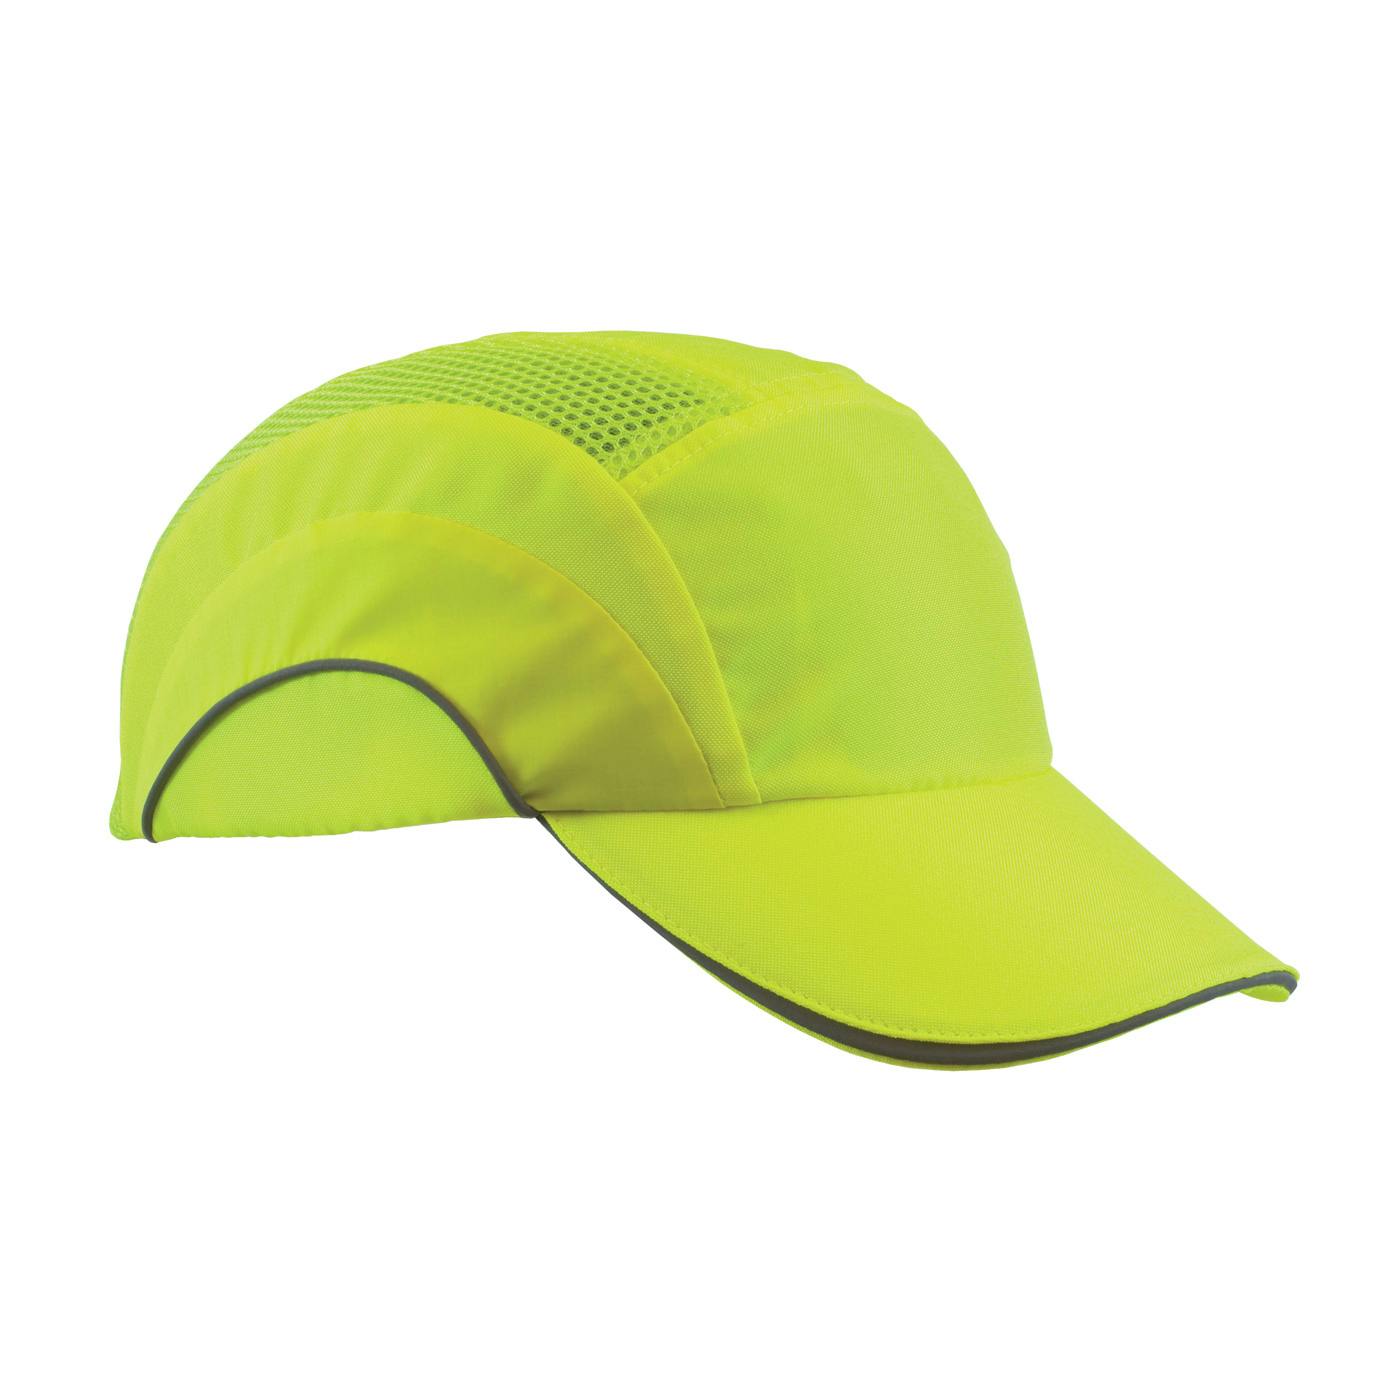 Hi-Vis Baseball Style Bump Cap with HDPE Protective Liner and Adjustable Back, Hi-Vis Yellow (282-ABR170-LY) - OS